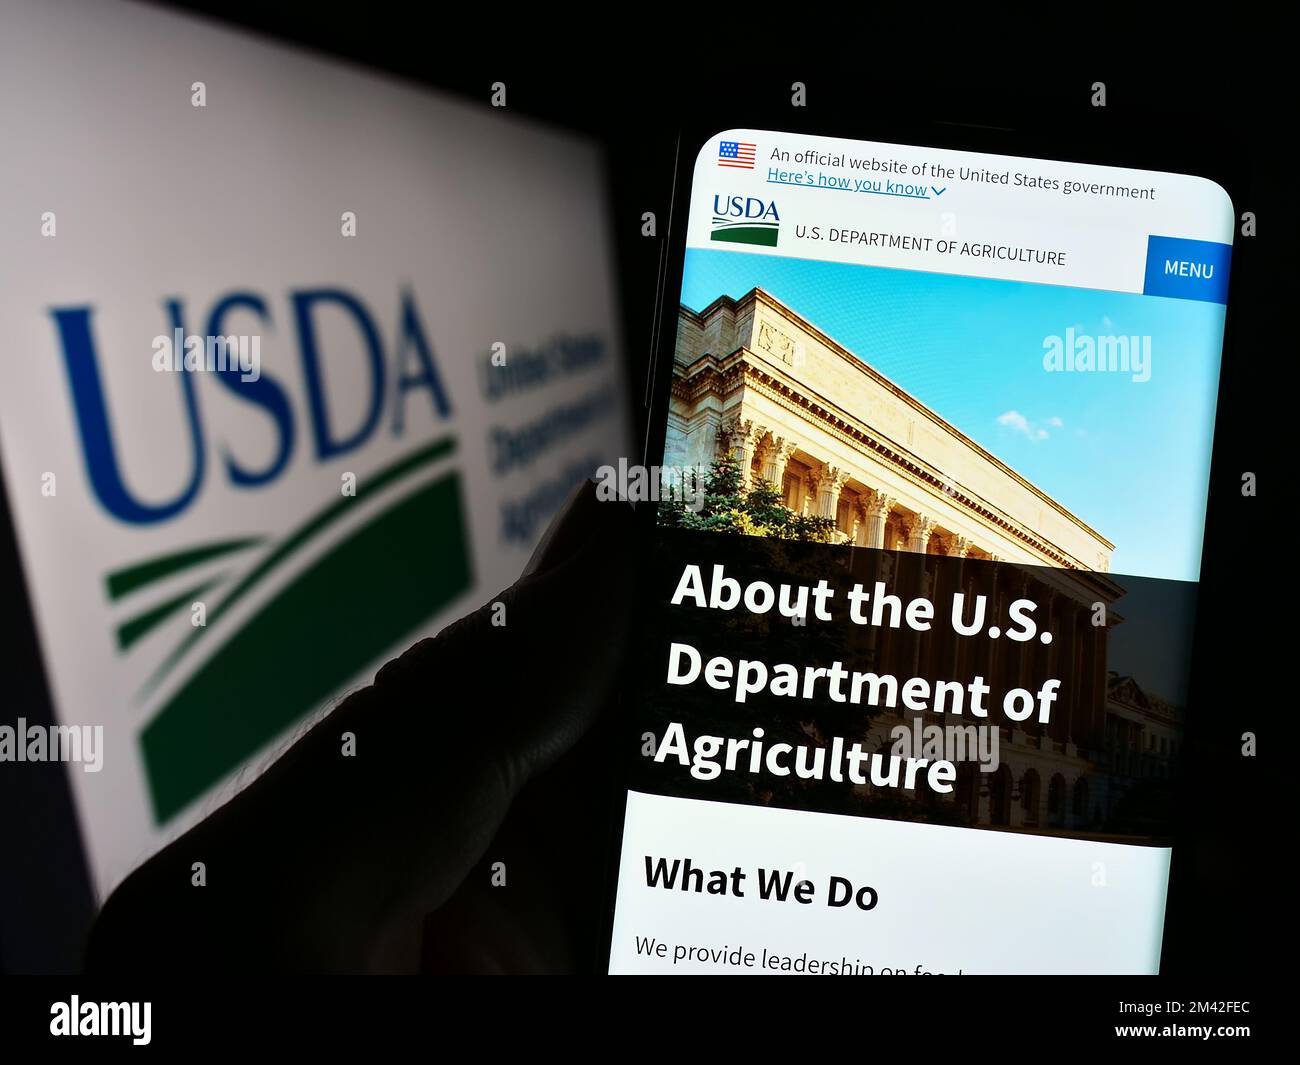 Person holding mobile phone with website of United States Department of Agriculture (USDA) on screen with logo. Focus on center of phone display. Stock Photo